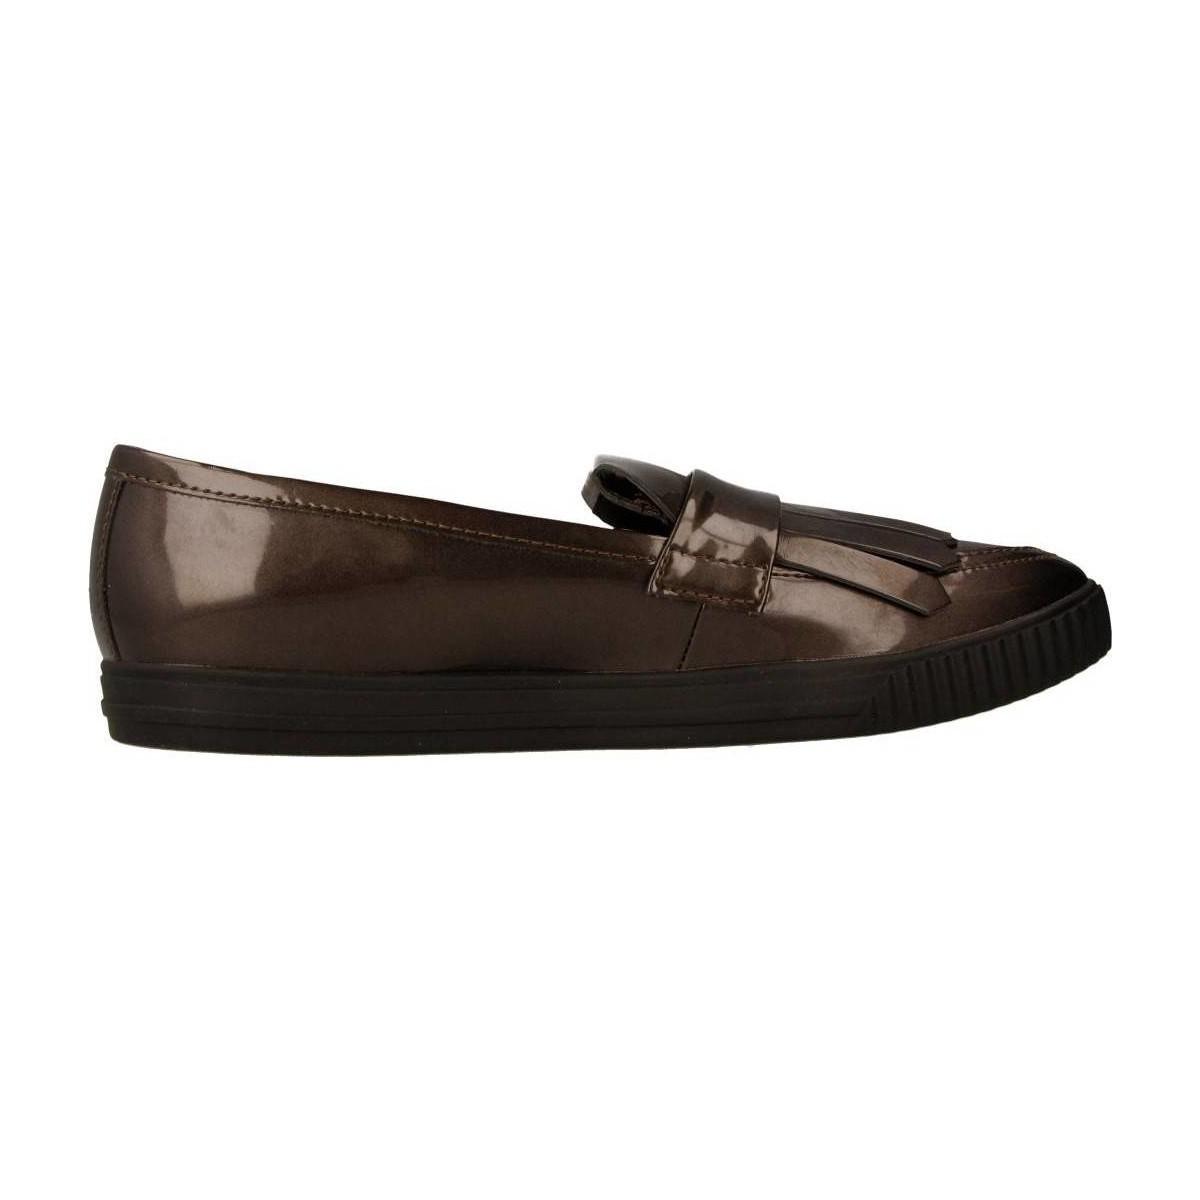 Geox D Amalthia E Women's Loafers / Casual Shoes In Brown - Lyst